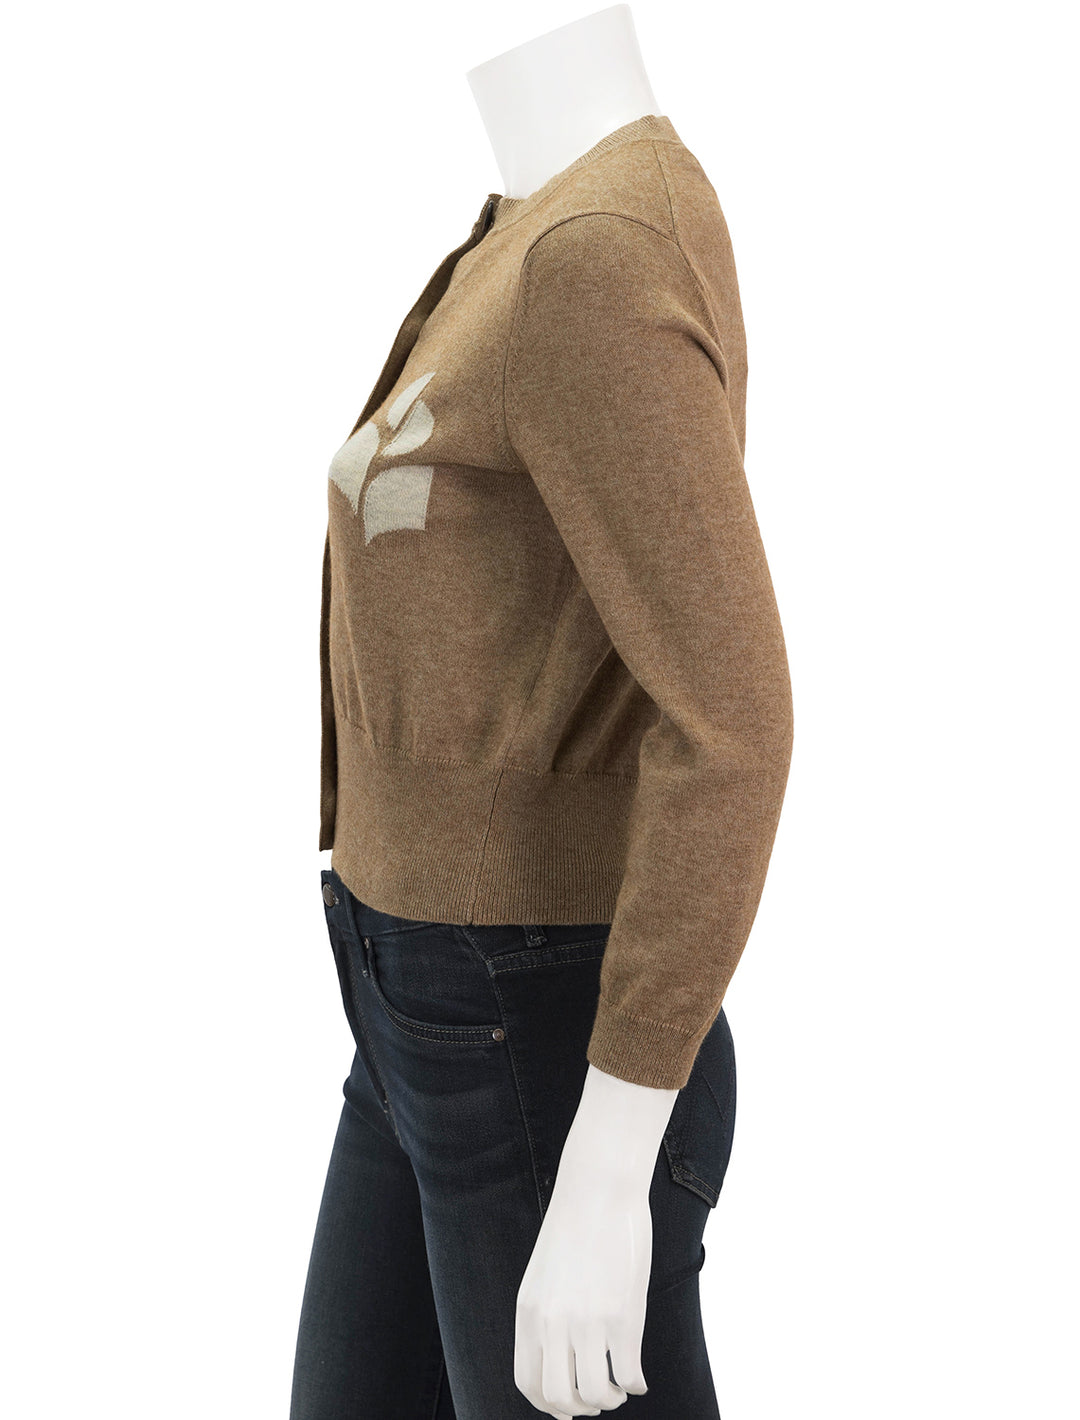 Side view of Isabel Marant Etoile's newton cardi in camel.